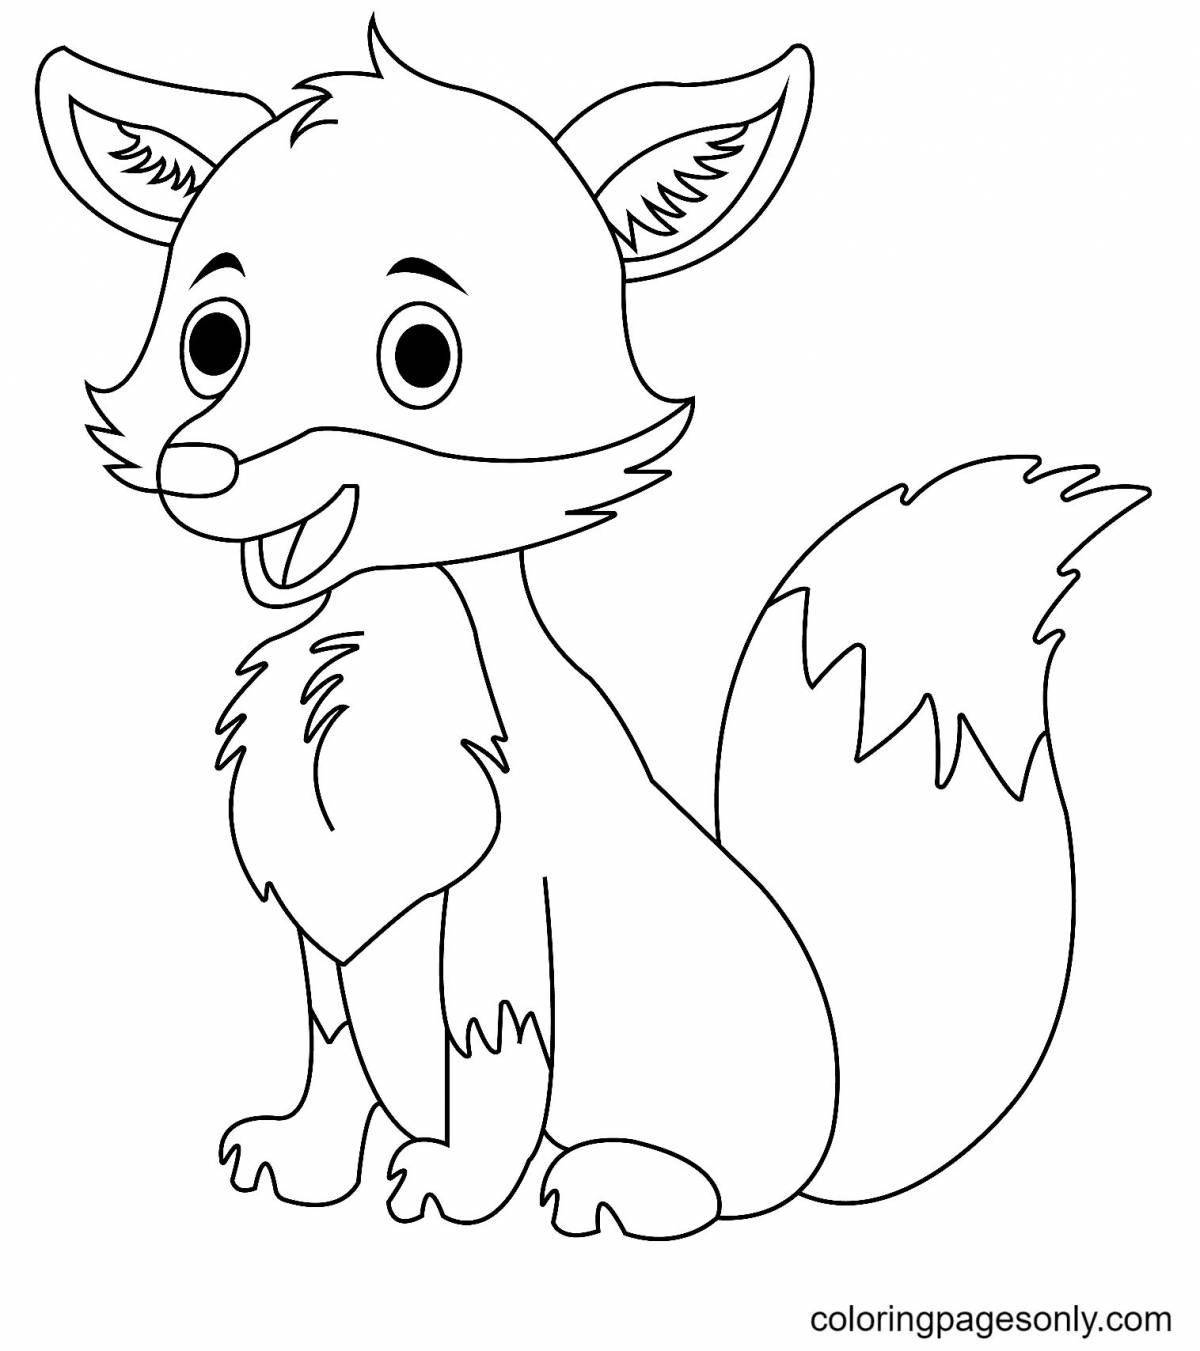 Live fox coloring book for children 2-3 years old